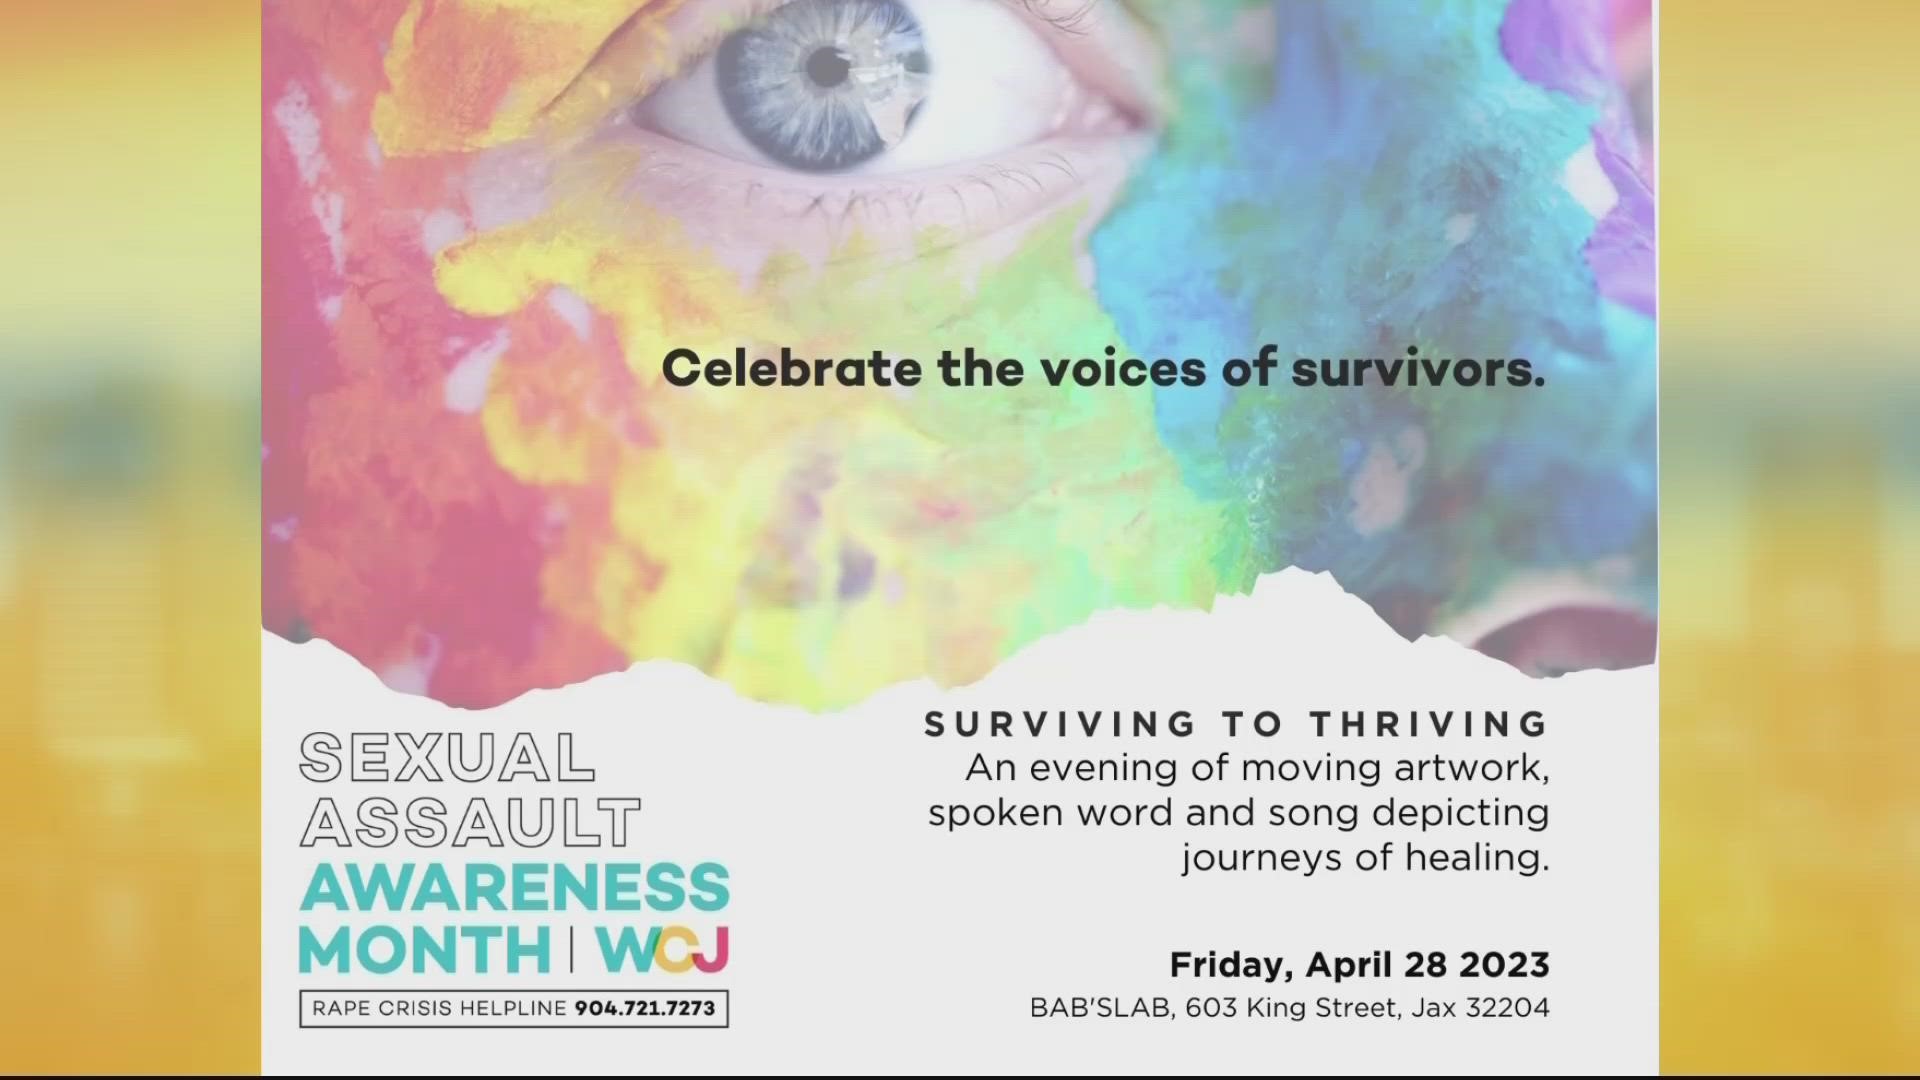 April is Sexual Assault Awareness Month. The Women's Center of Jacksonville will be hosting several events to raise awareness and deliver resources to survivors.